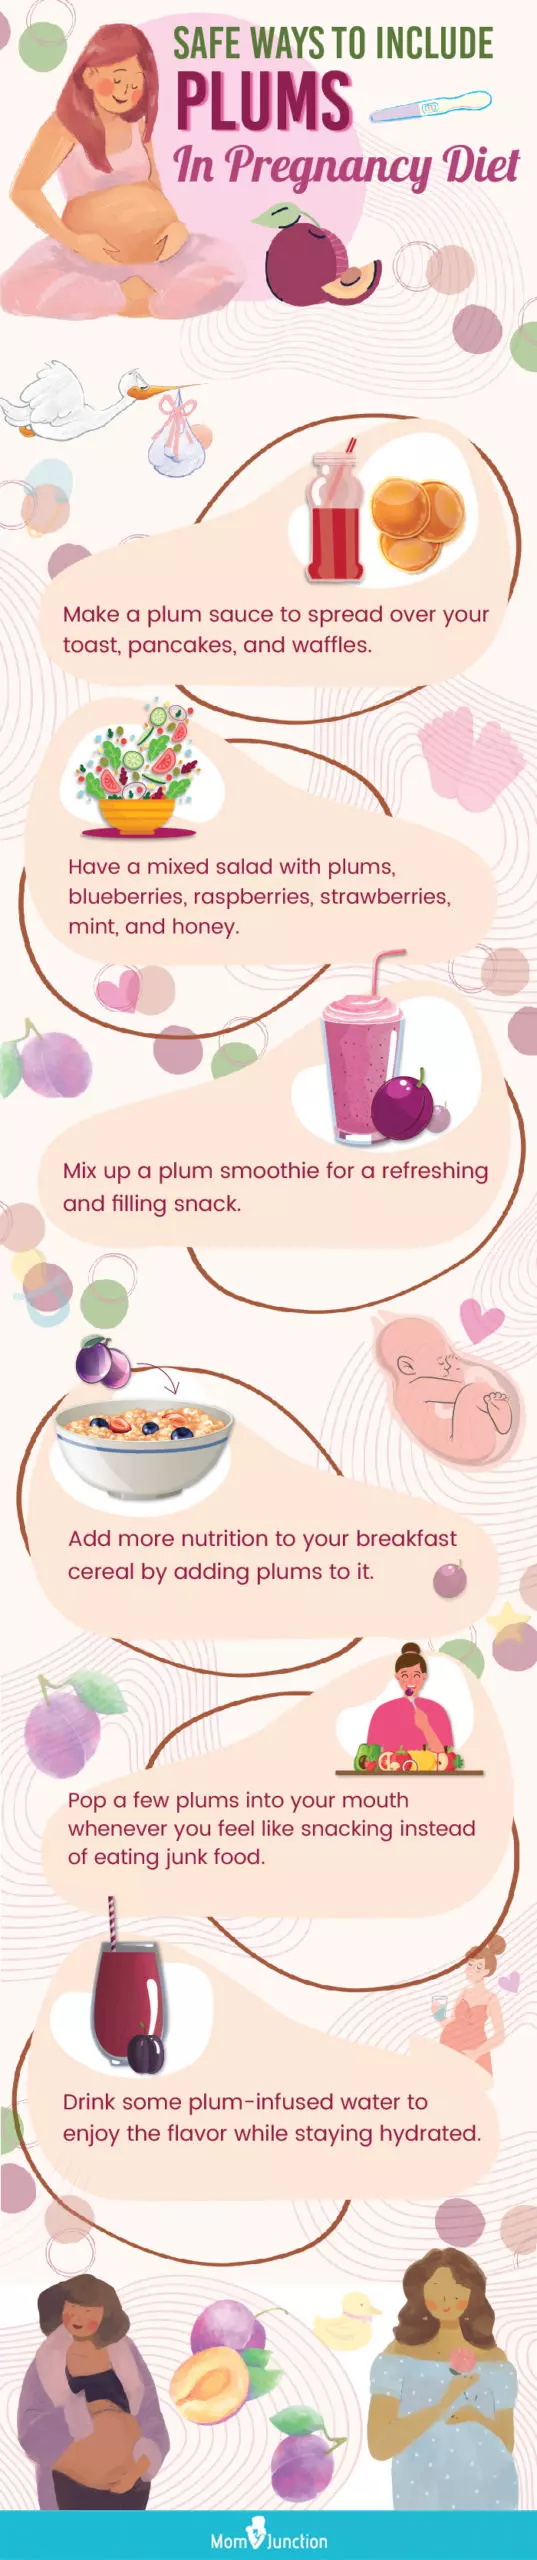 safe ways to include plums in pregnancy diet (infographic)